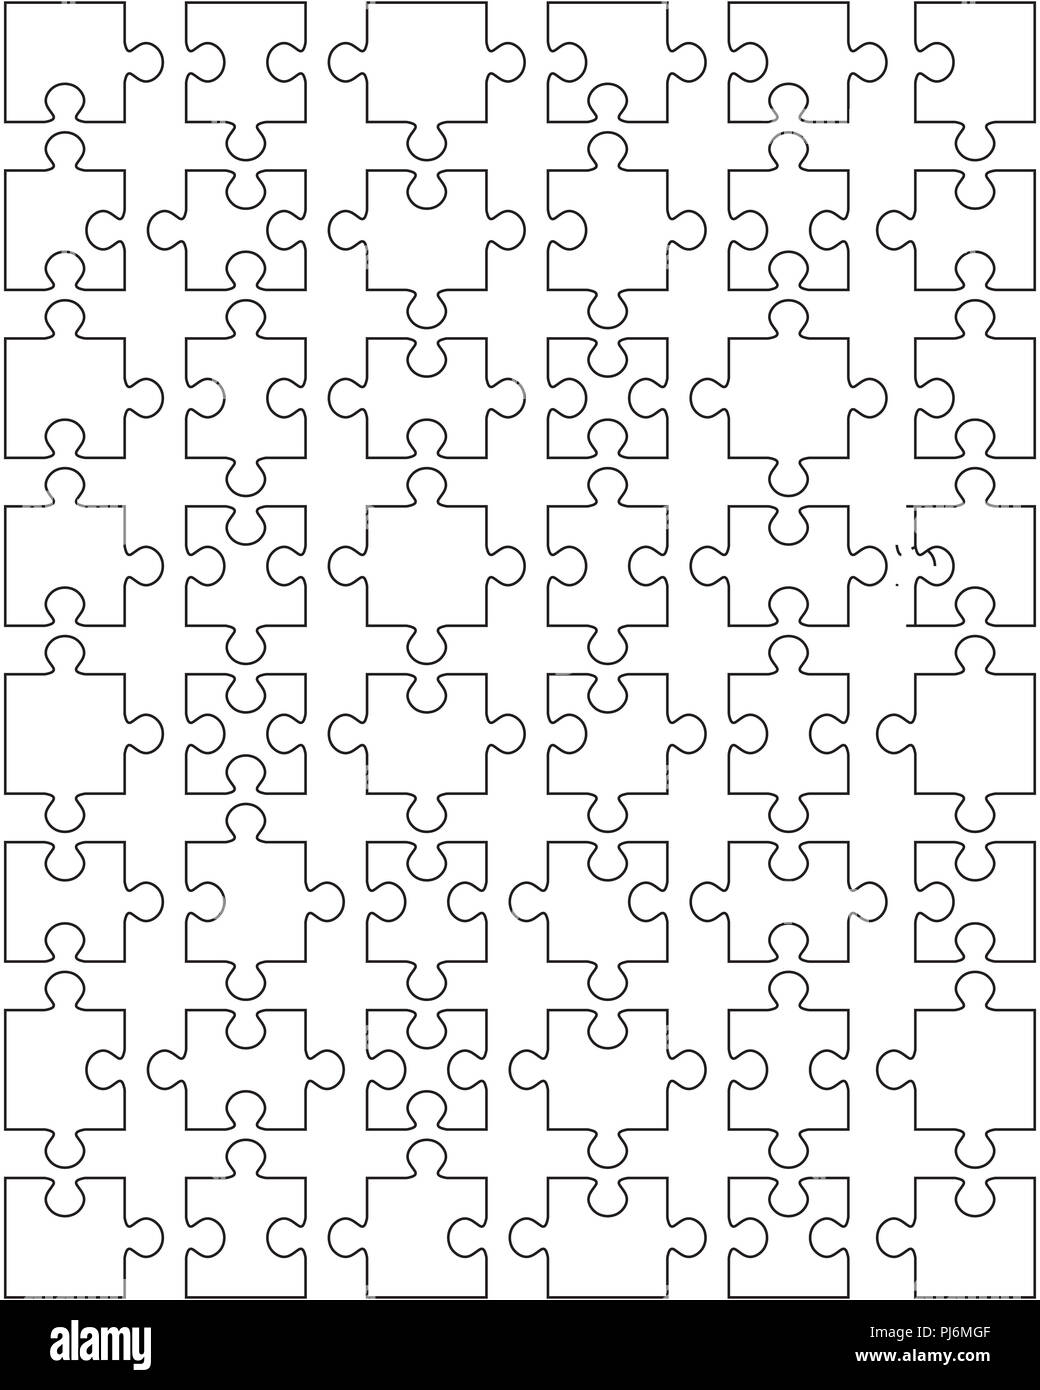 Vector illustration of puzzle, separate pieces Stock Photo - Alamy